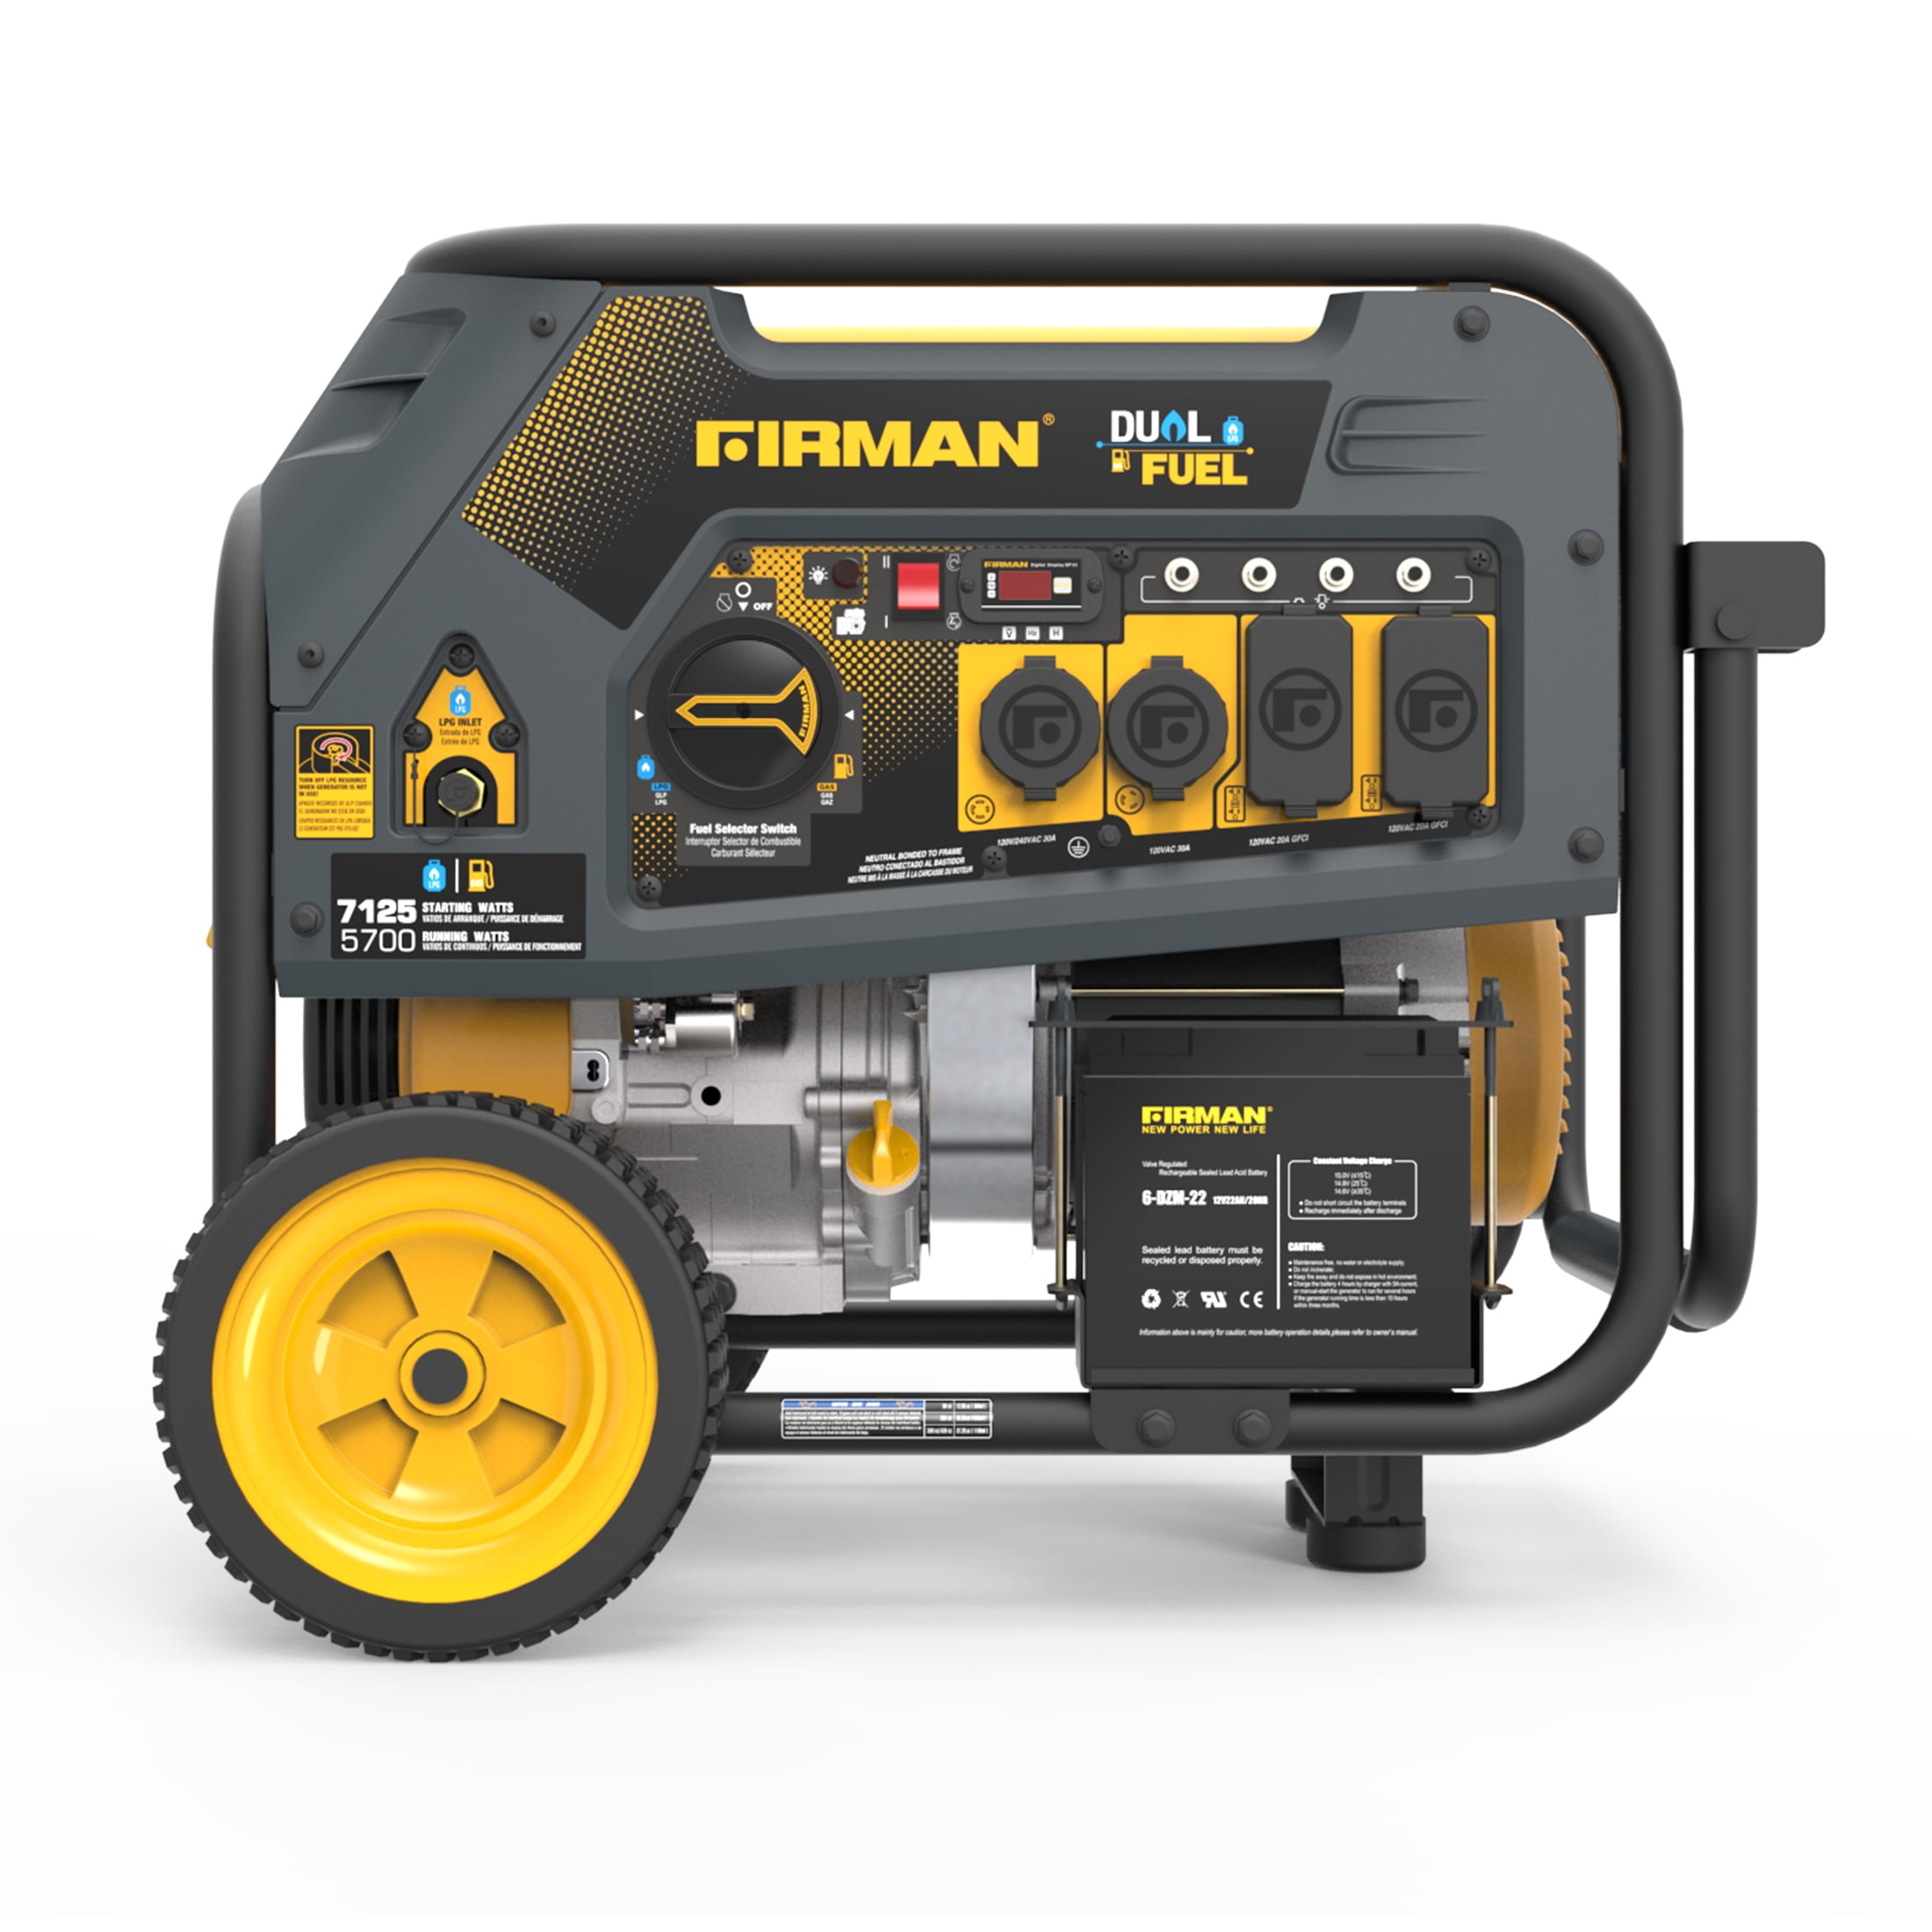 Picture of Firman Power Equipment H05751 Hybrid Series Dual Fuel 5700-7100W Extended Run Time Generator with Electric Start